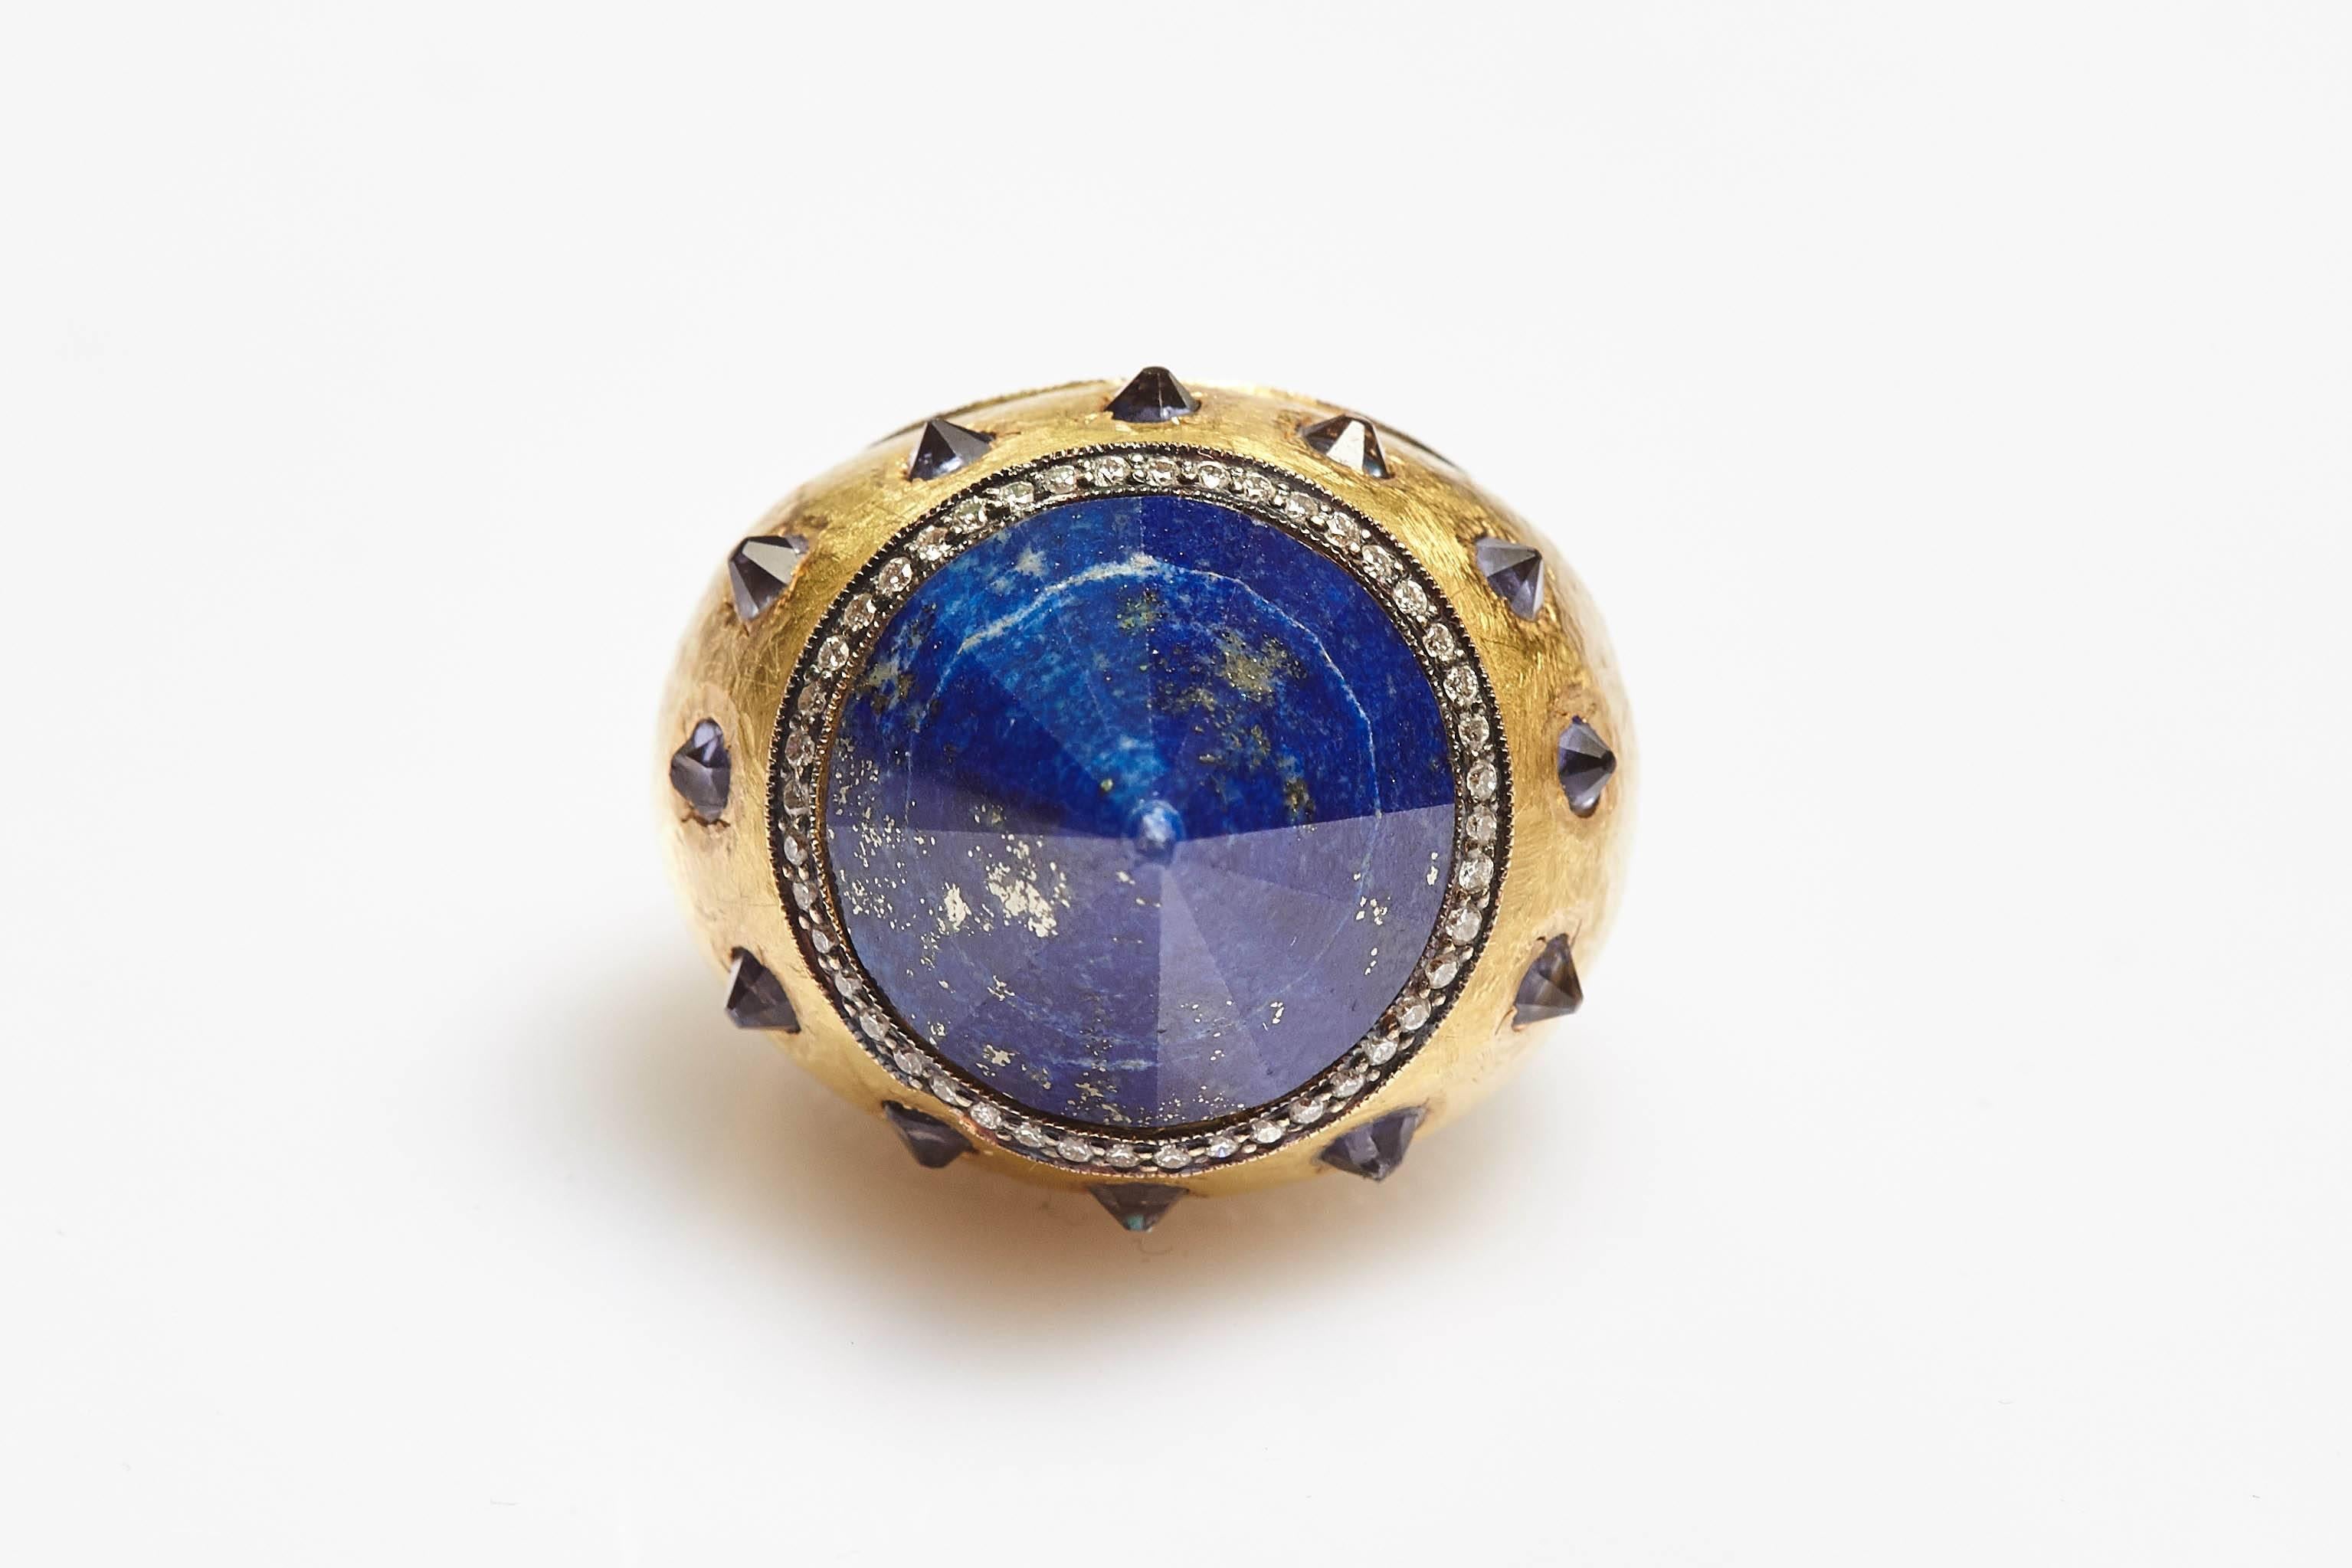 An unusual cocktail ring in 18kt yellow gold showcasing a sodalite cone, highlighted by diamonds and smaller sodalite elements. Made in Italy, circa 1970s